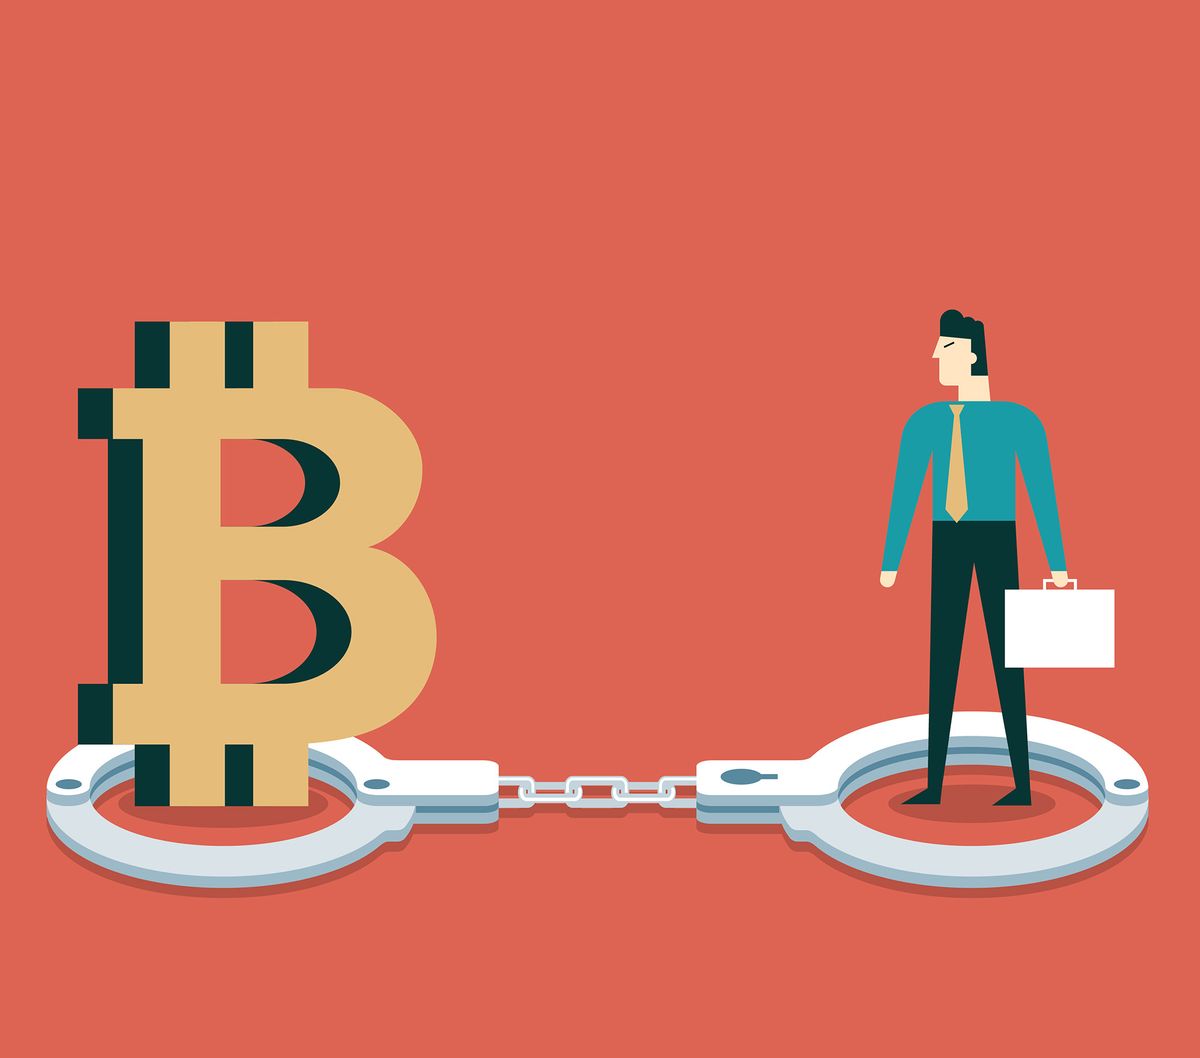 Punishment - Bitcoin - Businessman, The businessman was trapped in a Handcuff